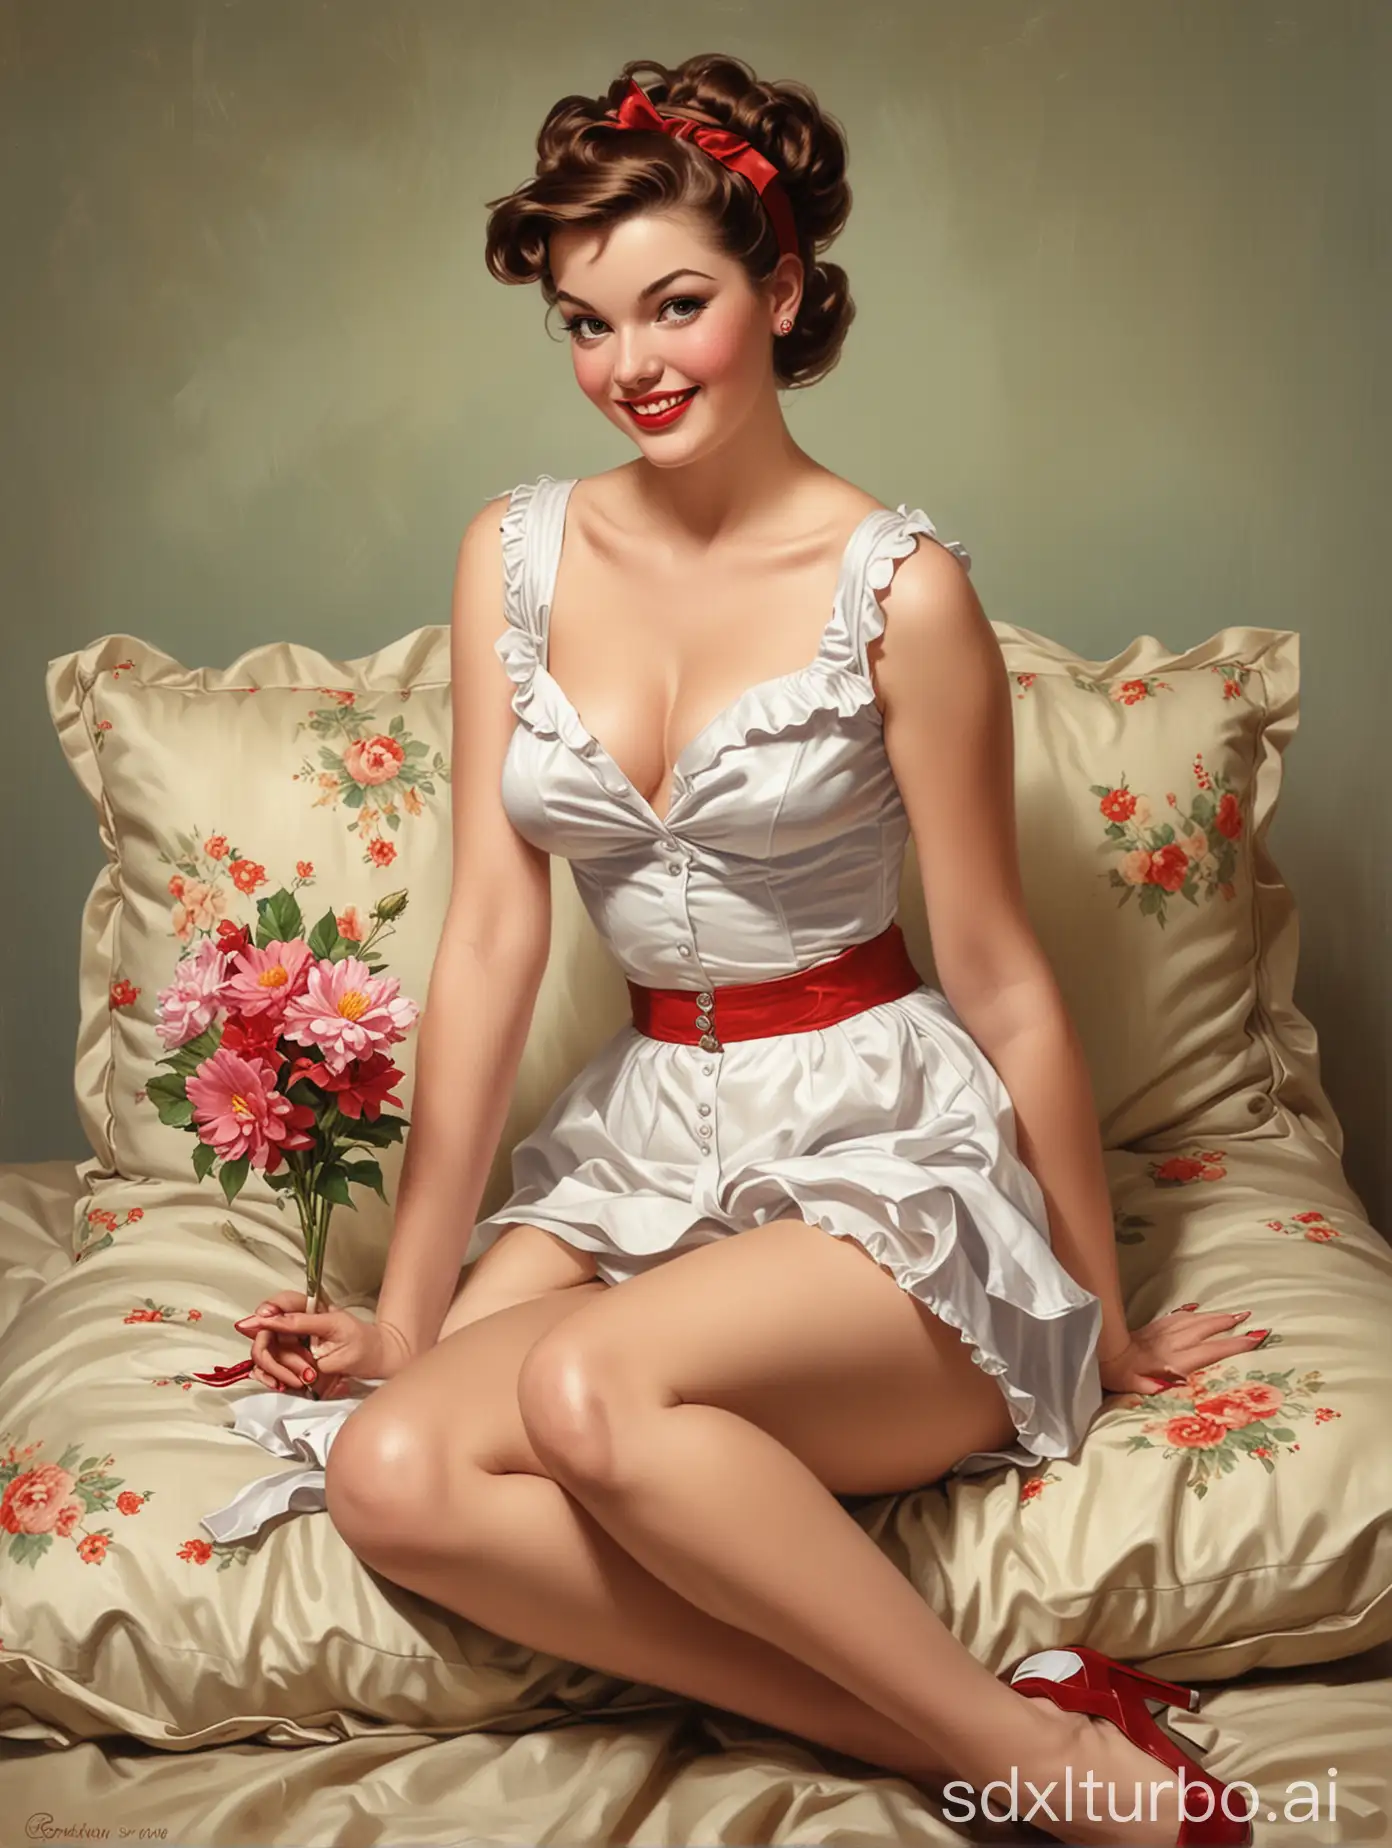 a painting of a woman sitting on a pillow, by Art Frahm, by Gil Elvgren, in the style of Gil Elvgren, by Joyce Ballantyne Brand, by artgerm and Gil Elvgren, by Andrew Loomis, pinup art, by Alberto Vargas, by Ernest Briggs, inspired by Gil Elvgren, by Rolf Armstrong, a pin-up poster girl, picking up a flower, with a smiling fashion model face, garters, a pencil painting, with a mischievous grin, on the front of a trading card, young lady, young woman looking up, pinup